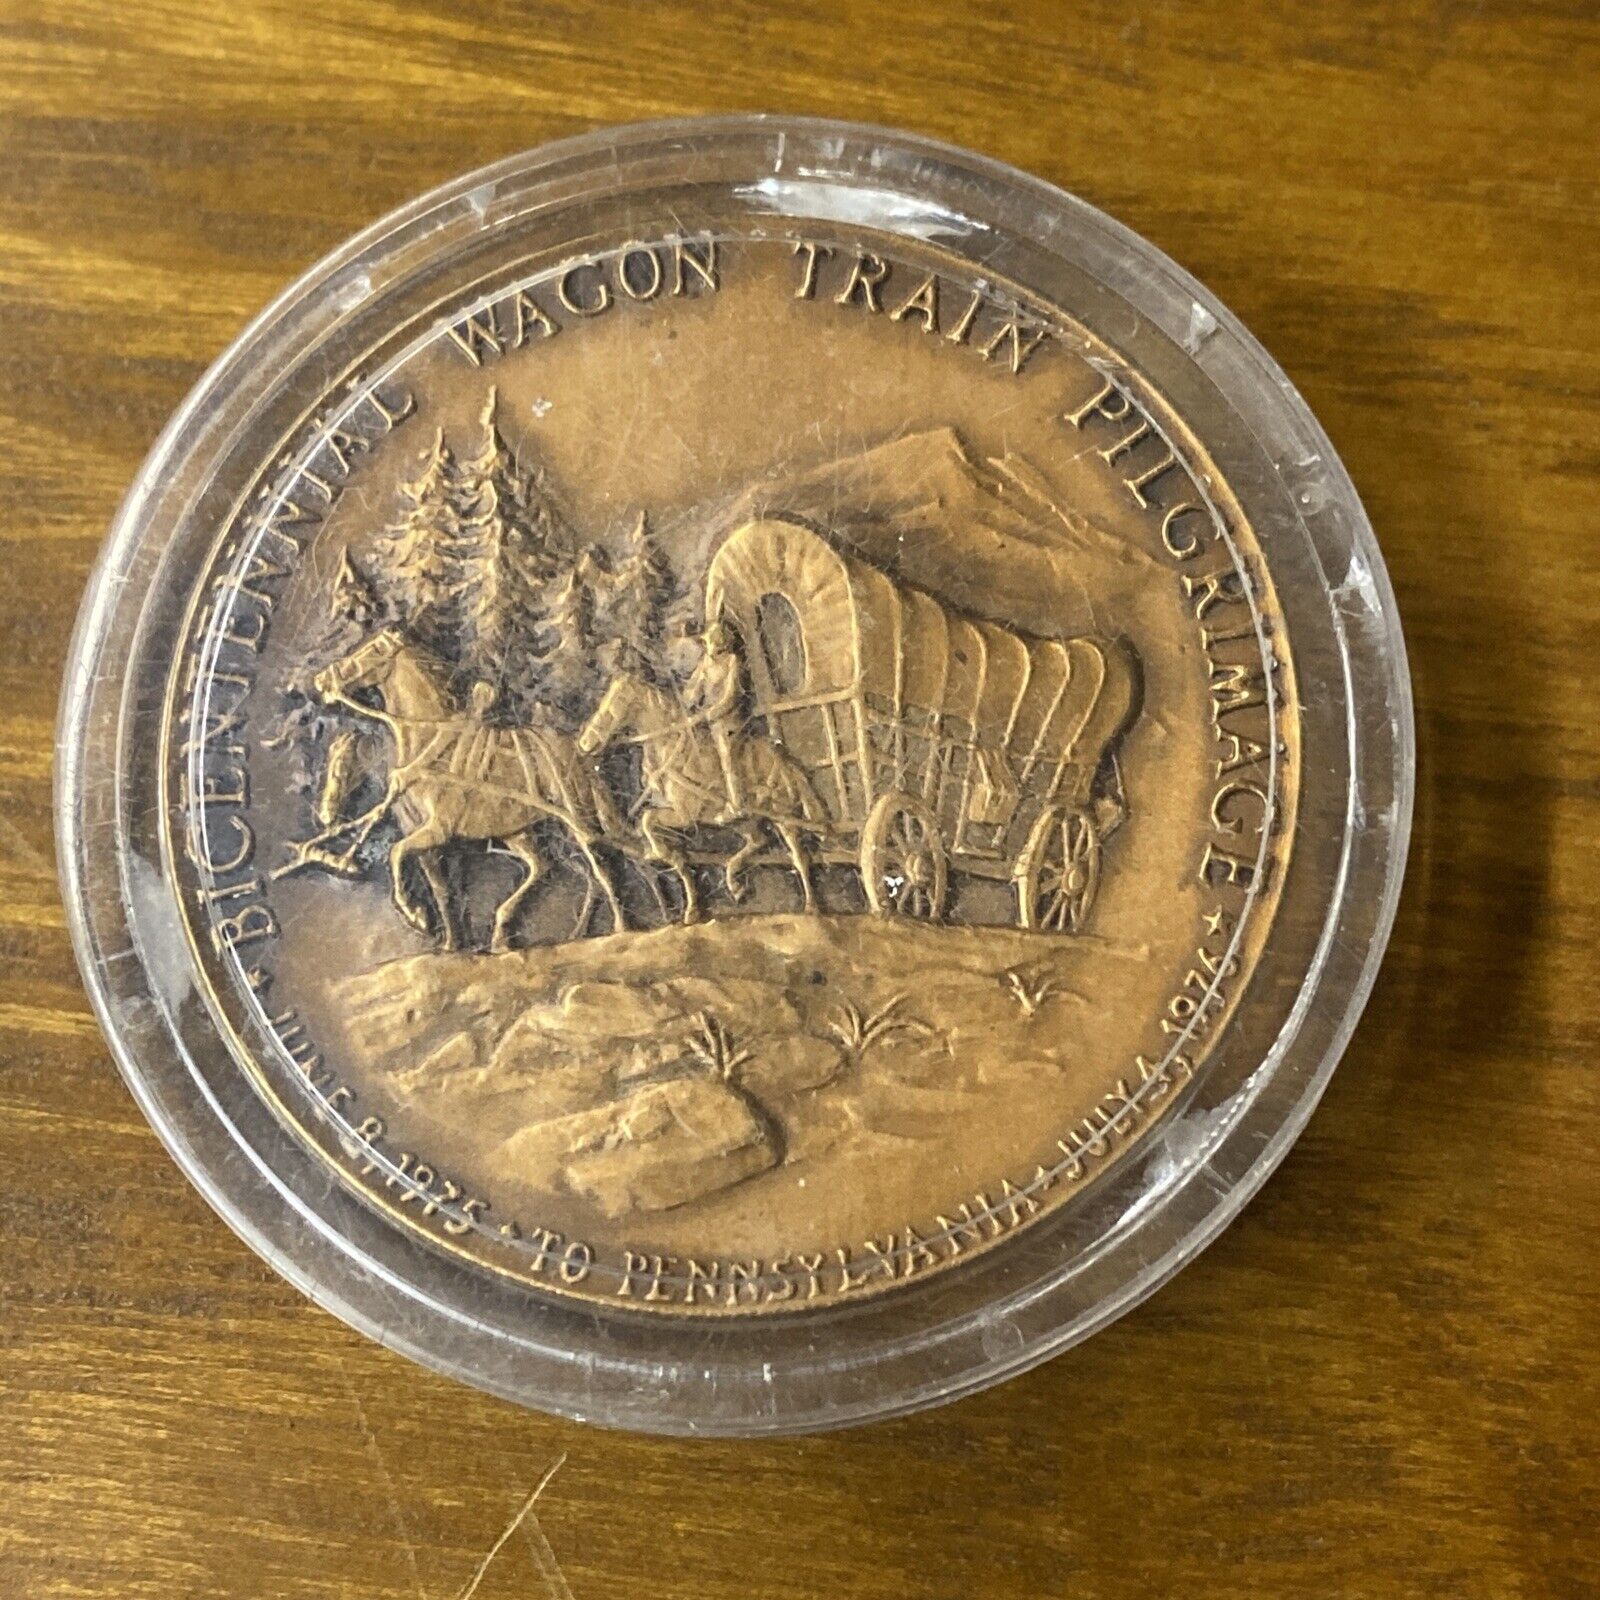 Vintage North American Trail Ride Conference Bicentennial Wagon Train PA Token